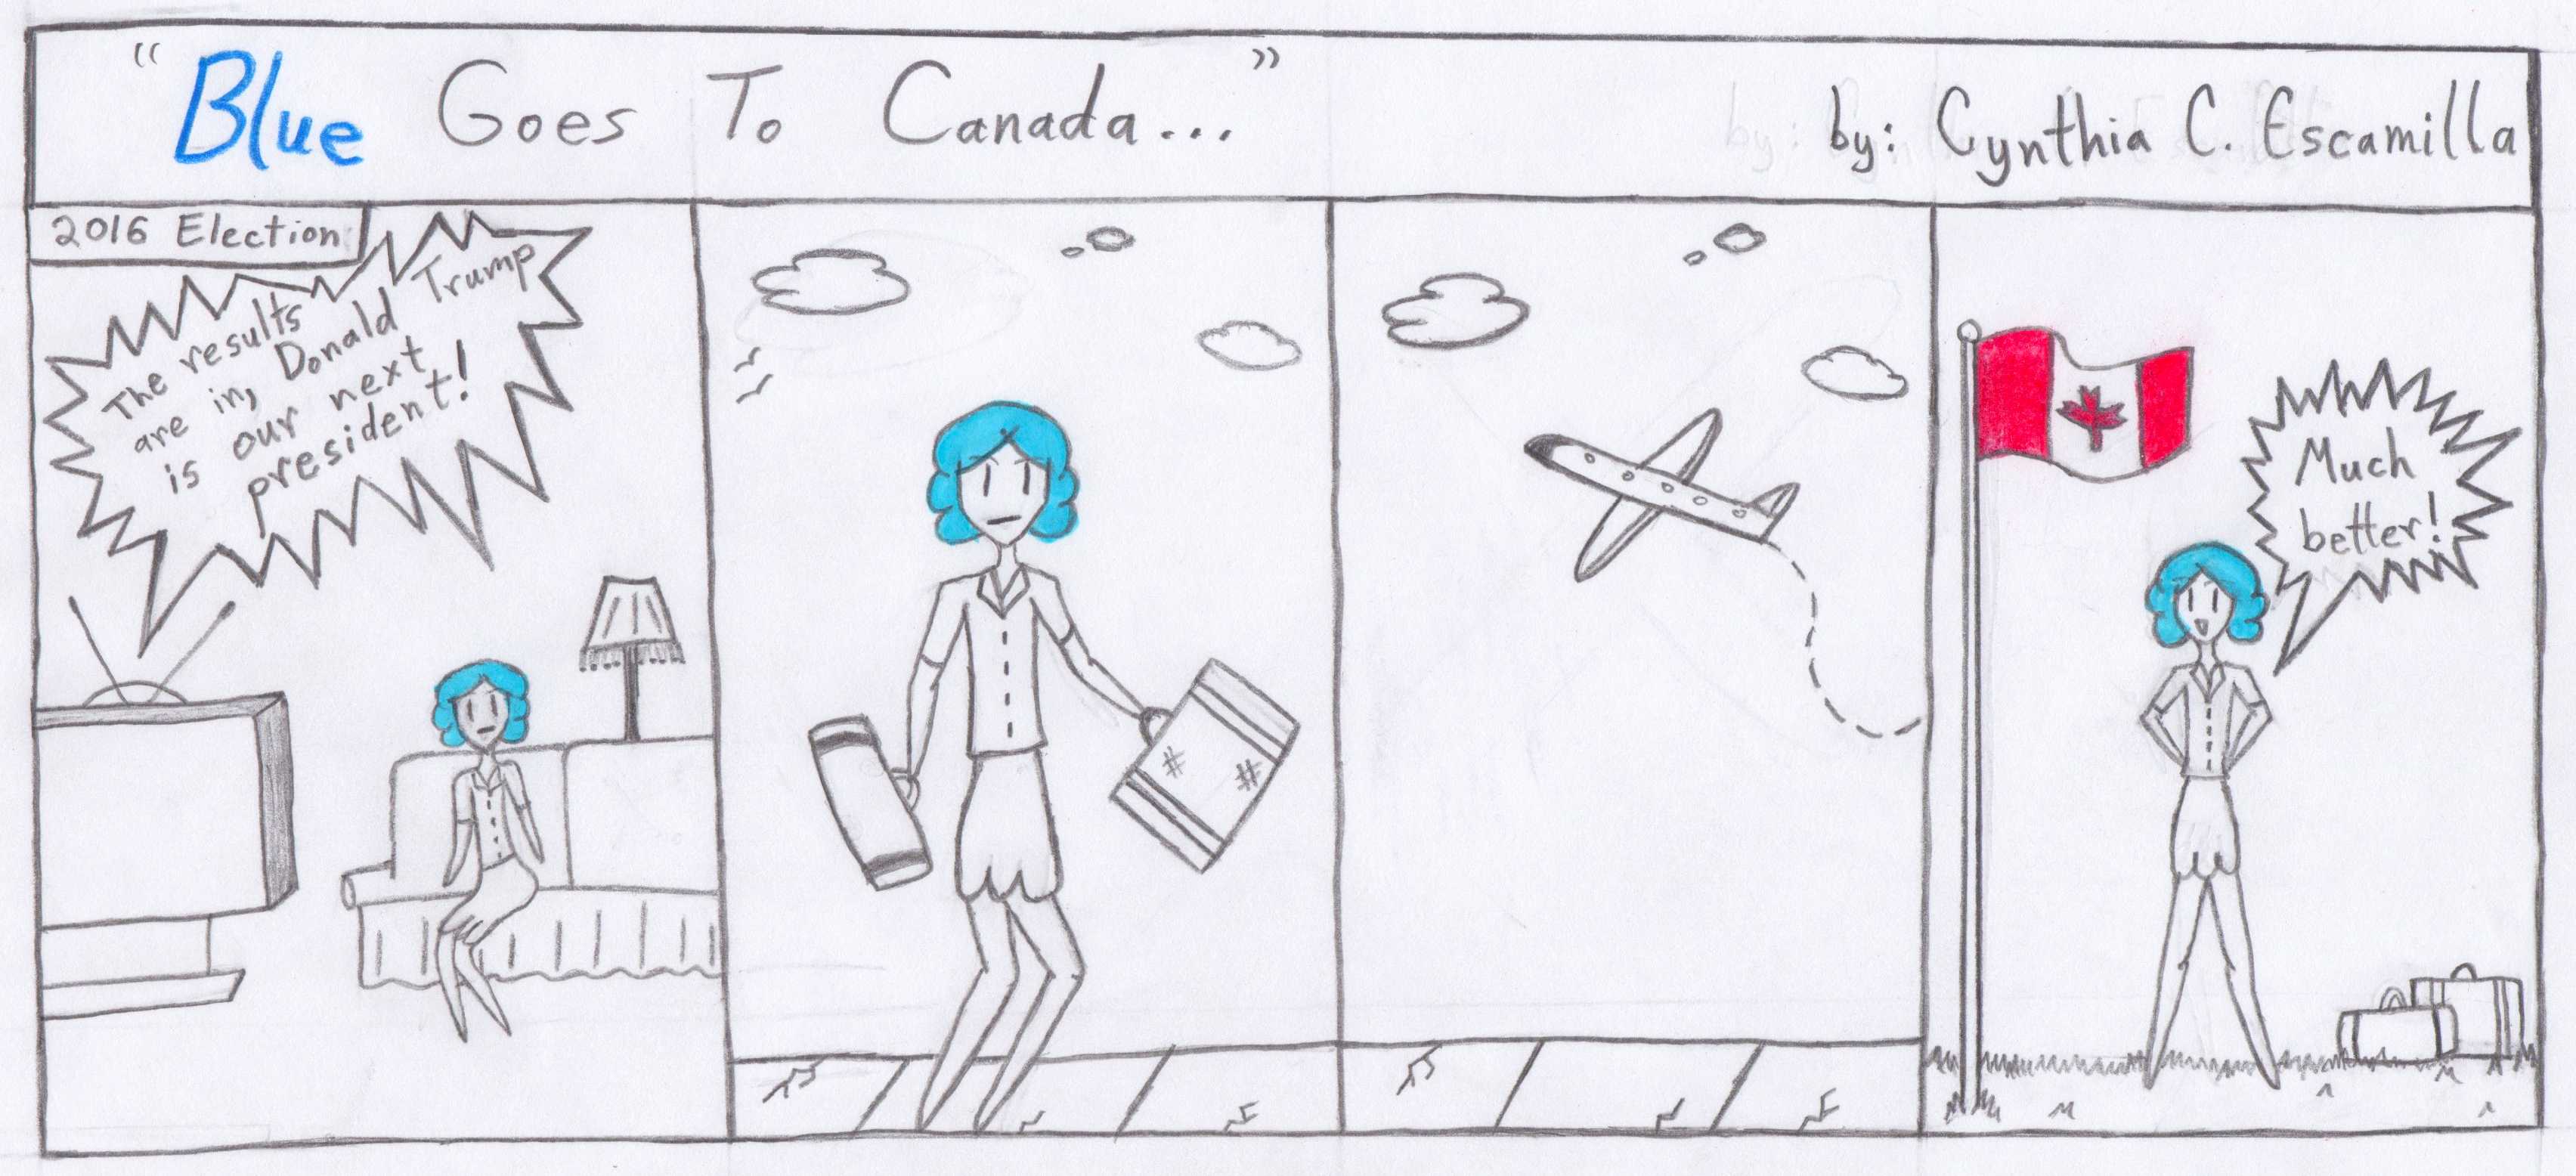 Comic titled Blue Goes to Canada. 1st slide: Woman with blue hair shown watching TV which announces Donald Trump is our next president Slide 2: Woman is shown carrying suitcases Slide 3: Plane is shown flying off Slide 4: Woman is shown in Canada saying Much Better